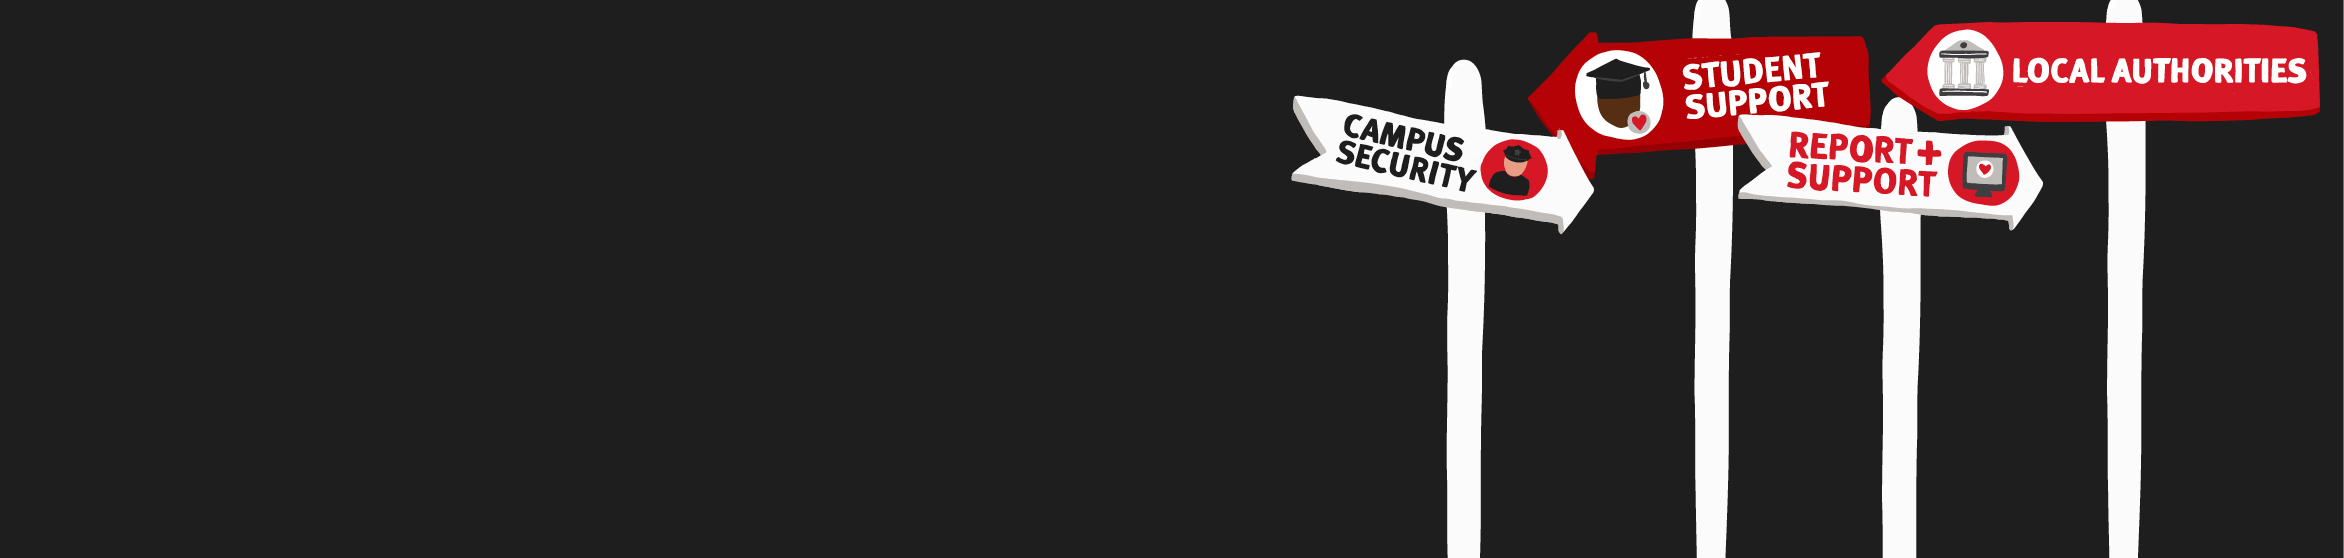 Support services illustration, with signposts pointing to Campus Security, Student Support, Report + Support and Local Authorities